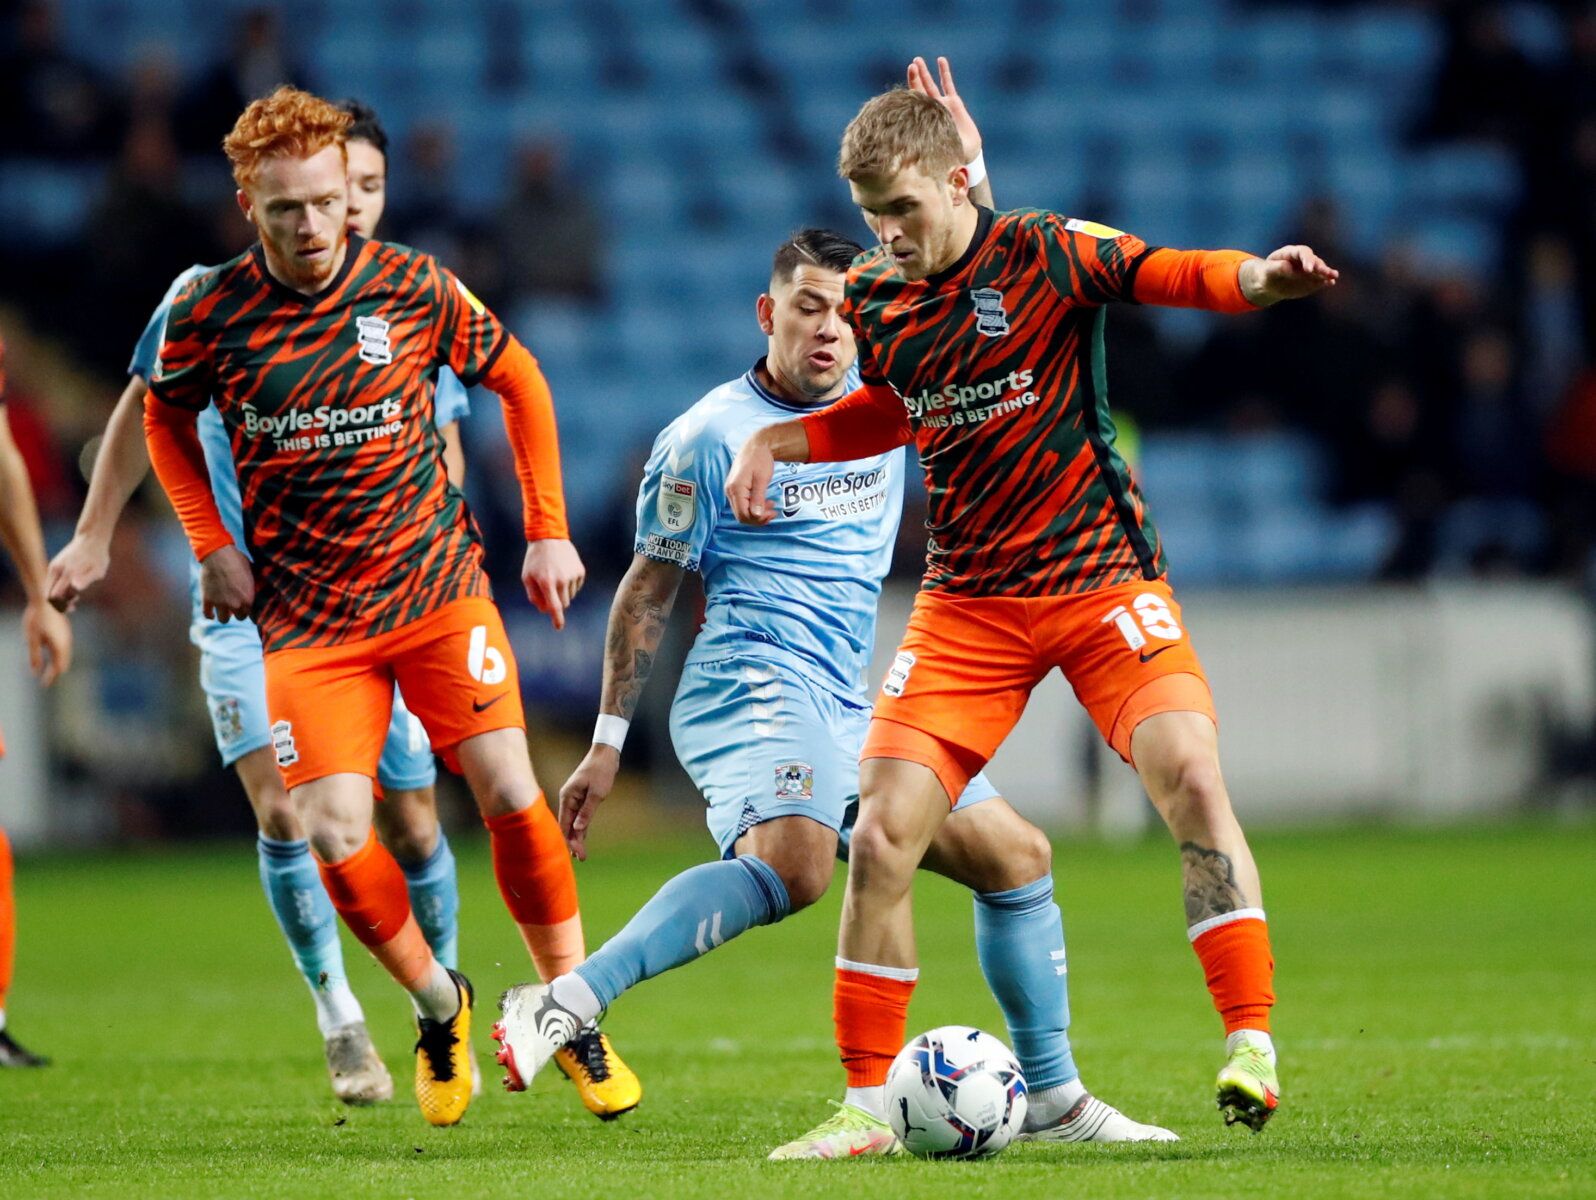 Soccer Football - Championship - Coventry City v Birmingham City - Building Society Arena, Coventry, Britain - November 23, 2021 Coventry City's Gustavo Hamer in action with Birmingham City's Riley McGree   Action Images/Andrew Boyers